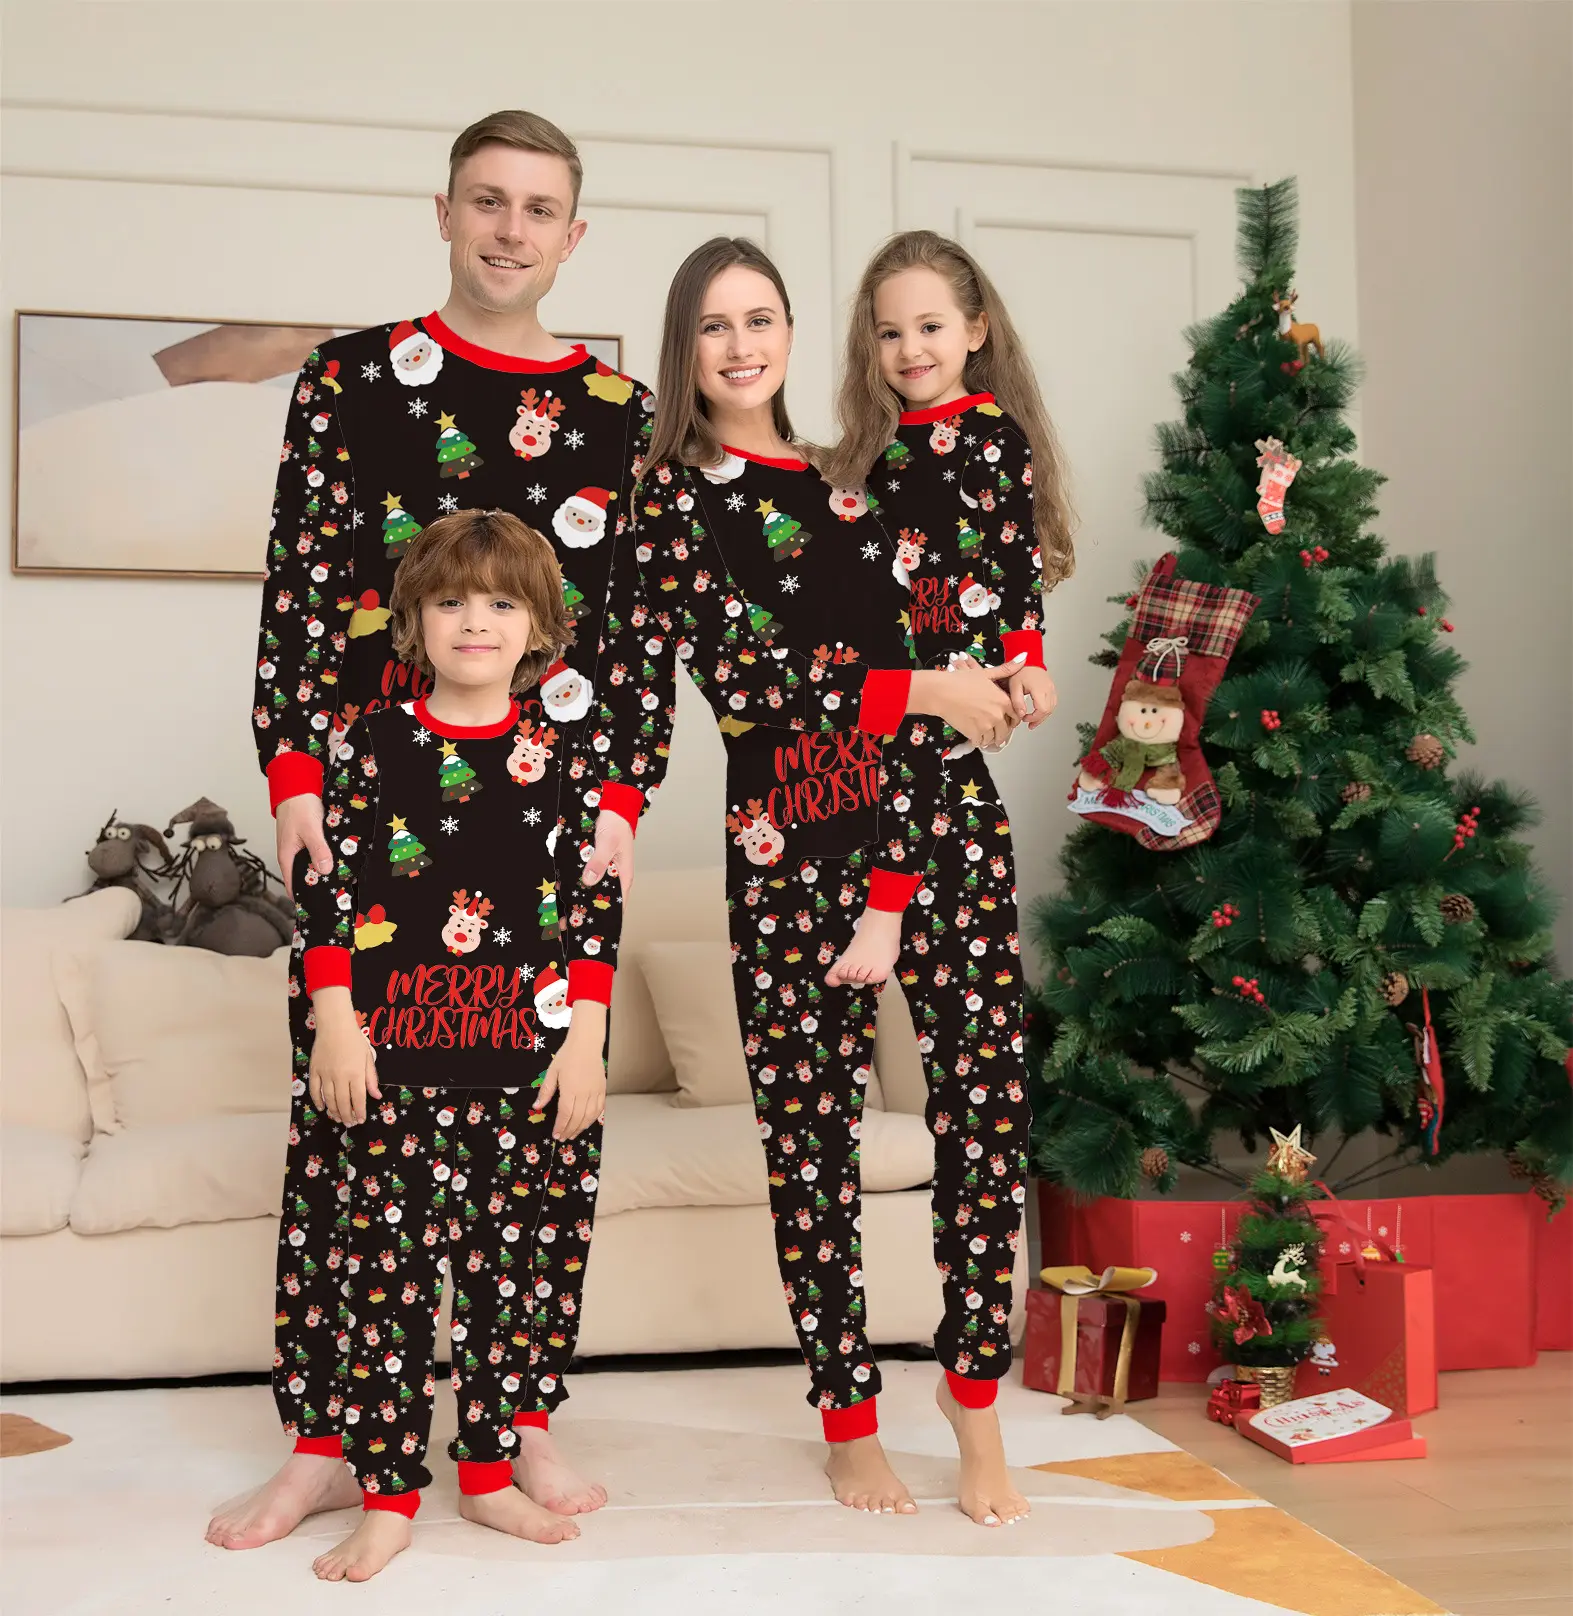 wholesale matching Christmas custom pajamas OEM outfits for family 2022 Christmas family outfits clothes lounge wear sets